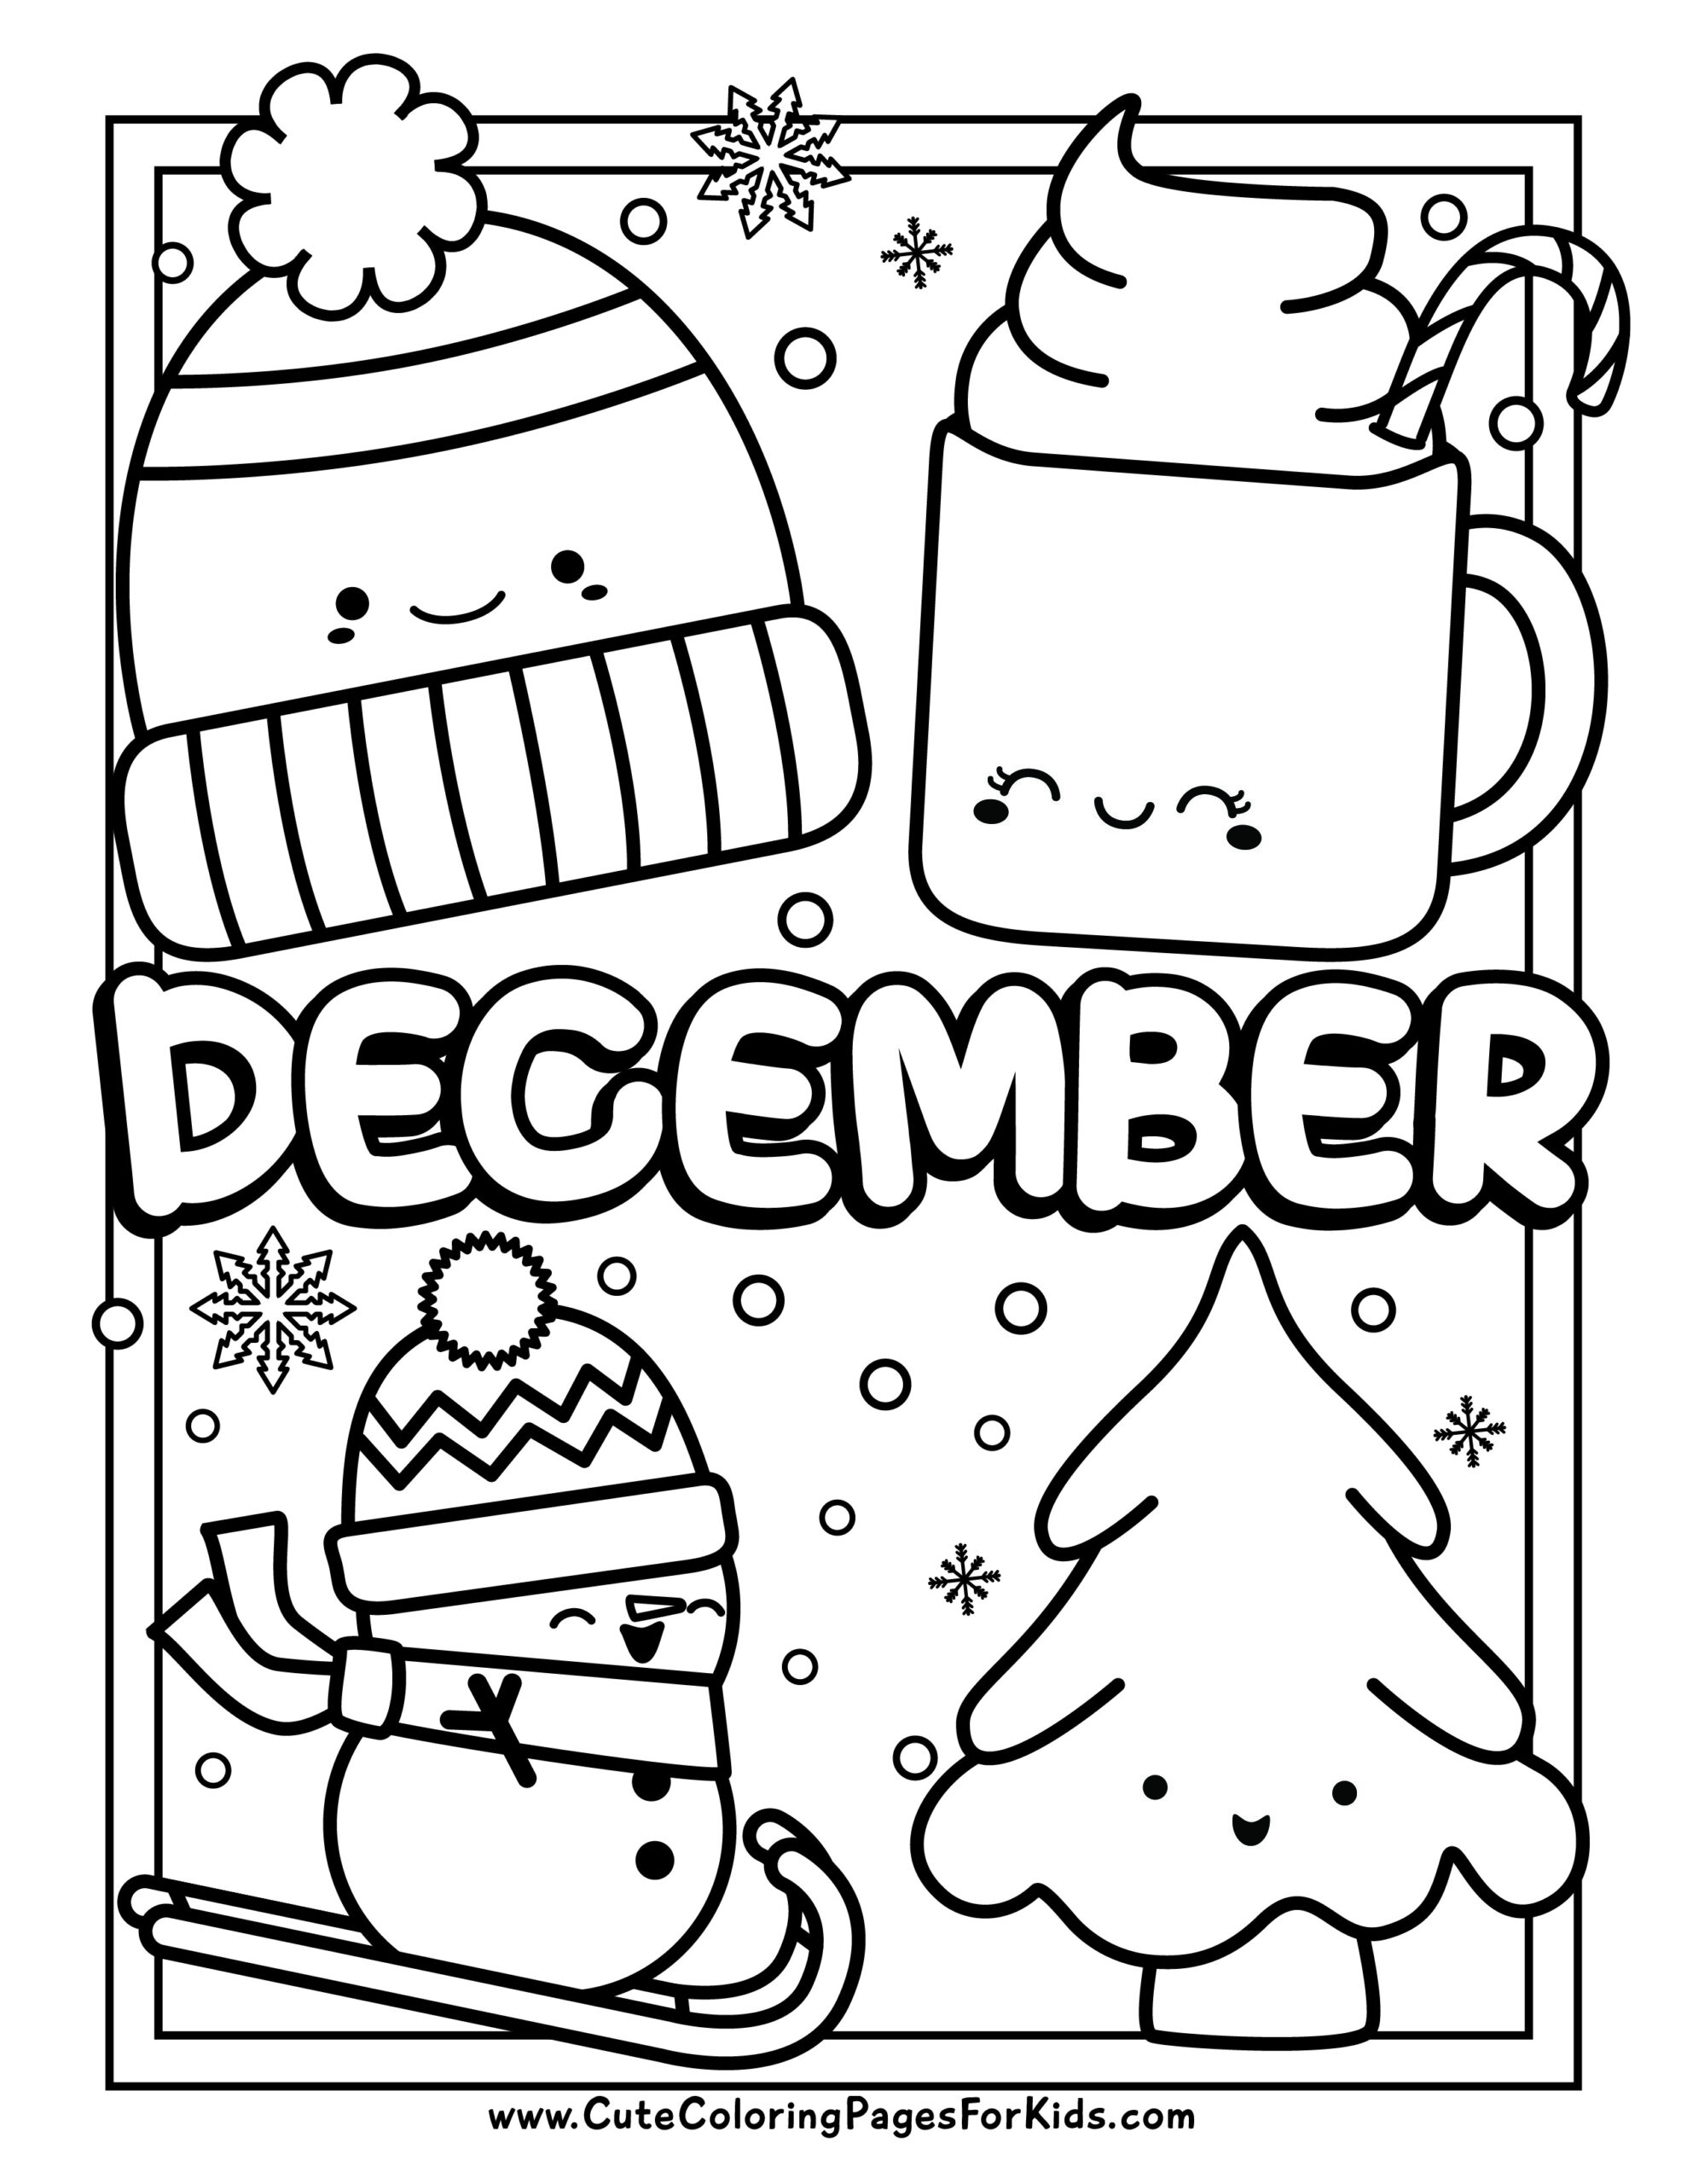 December Coloring Pages: 4 Free ...